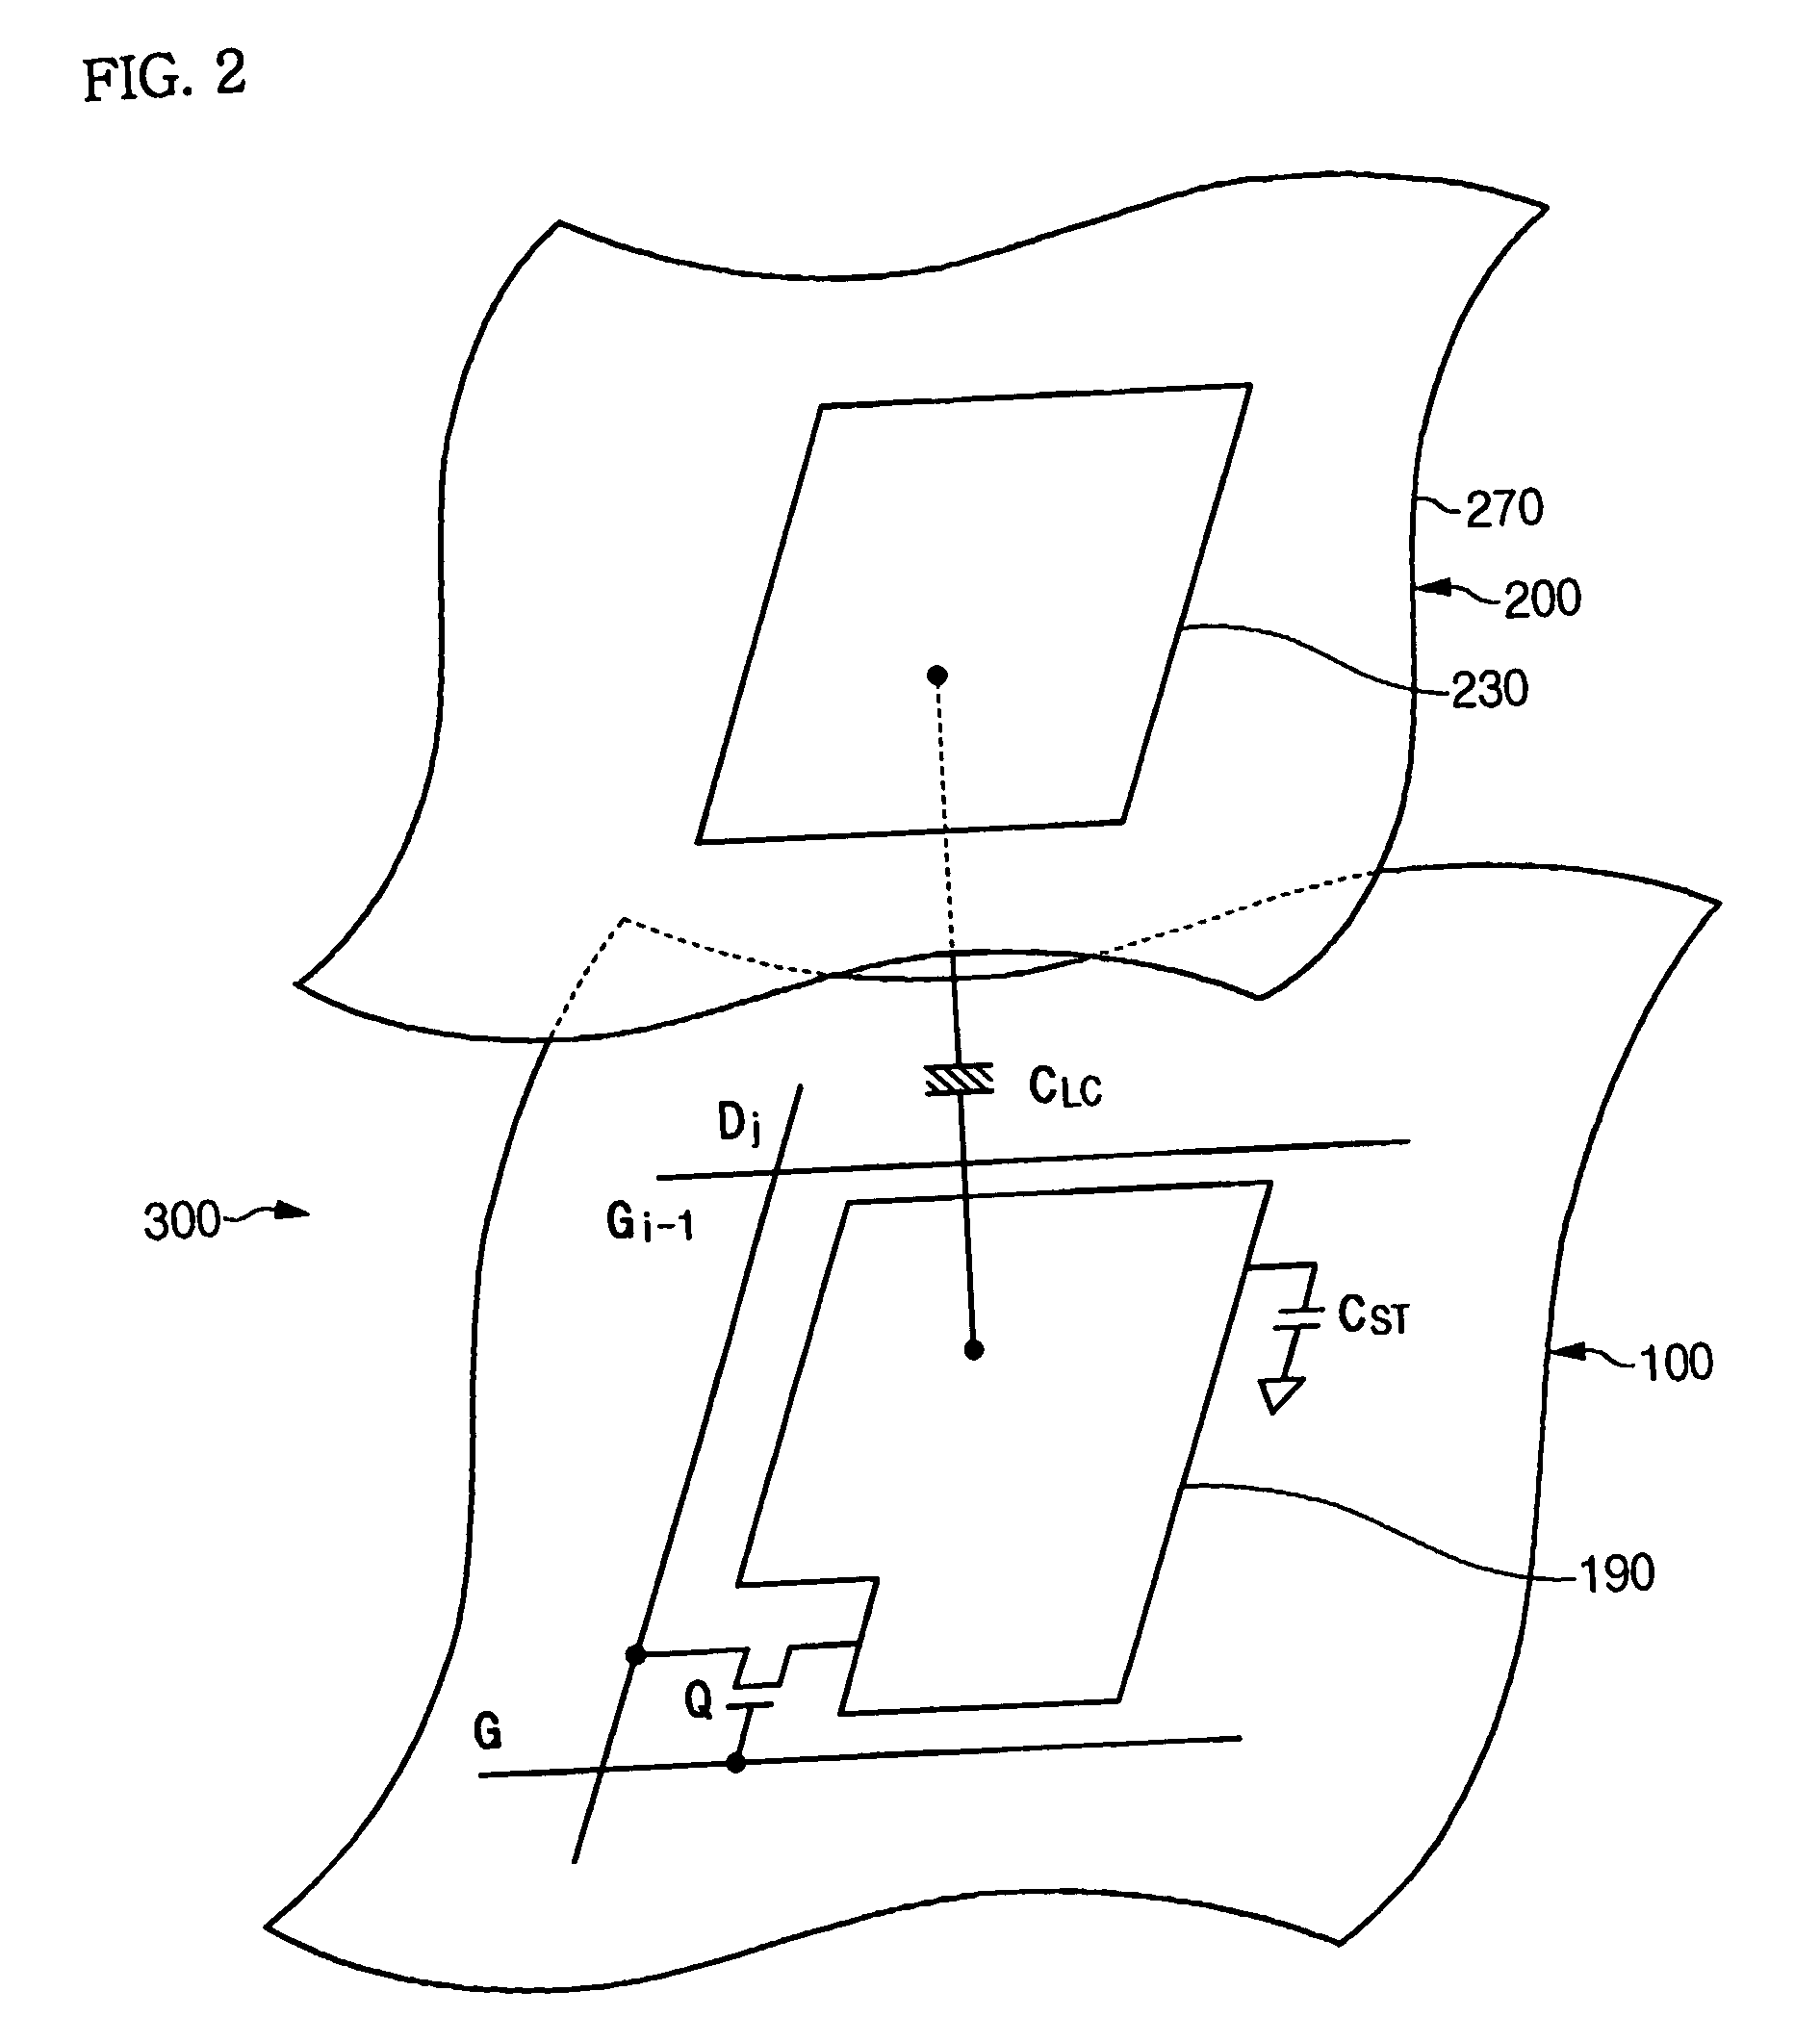 Apparatus and method of converting image signal for four color display device